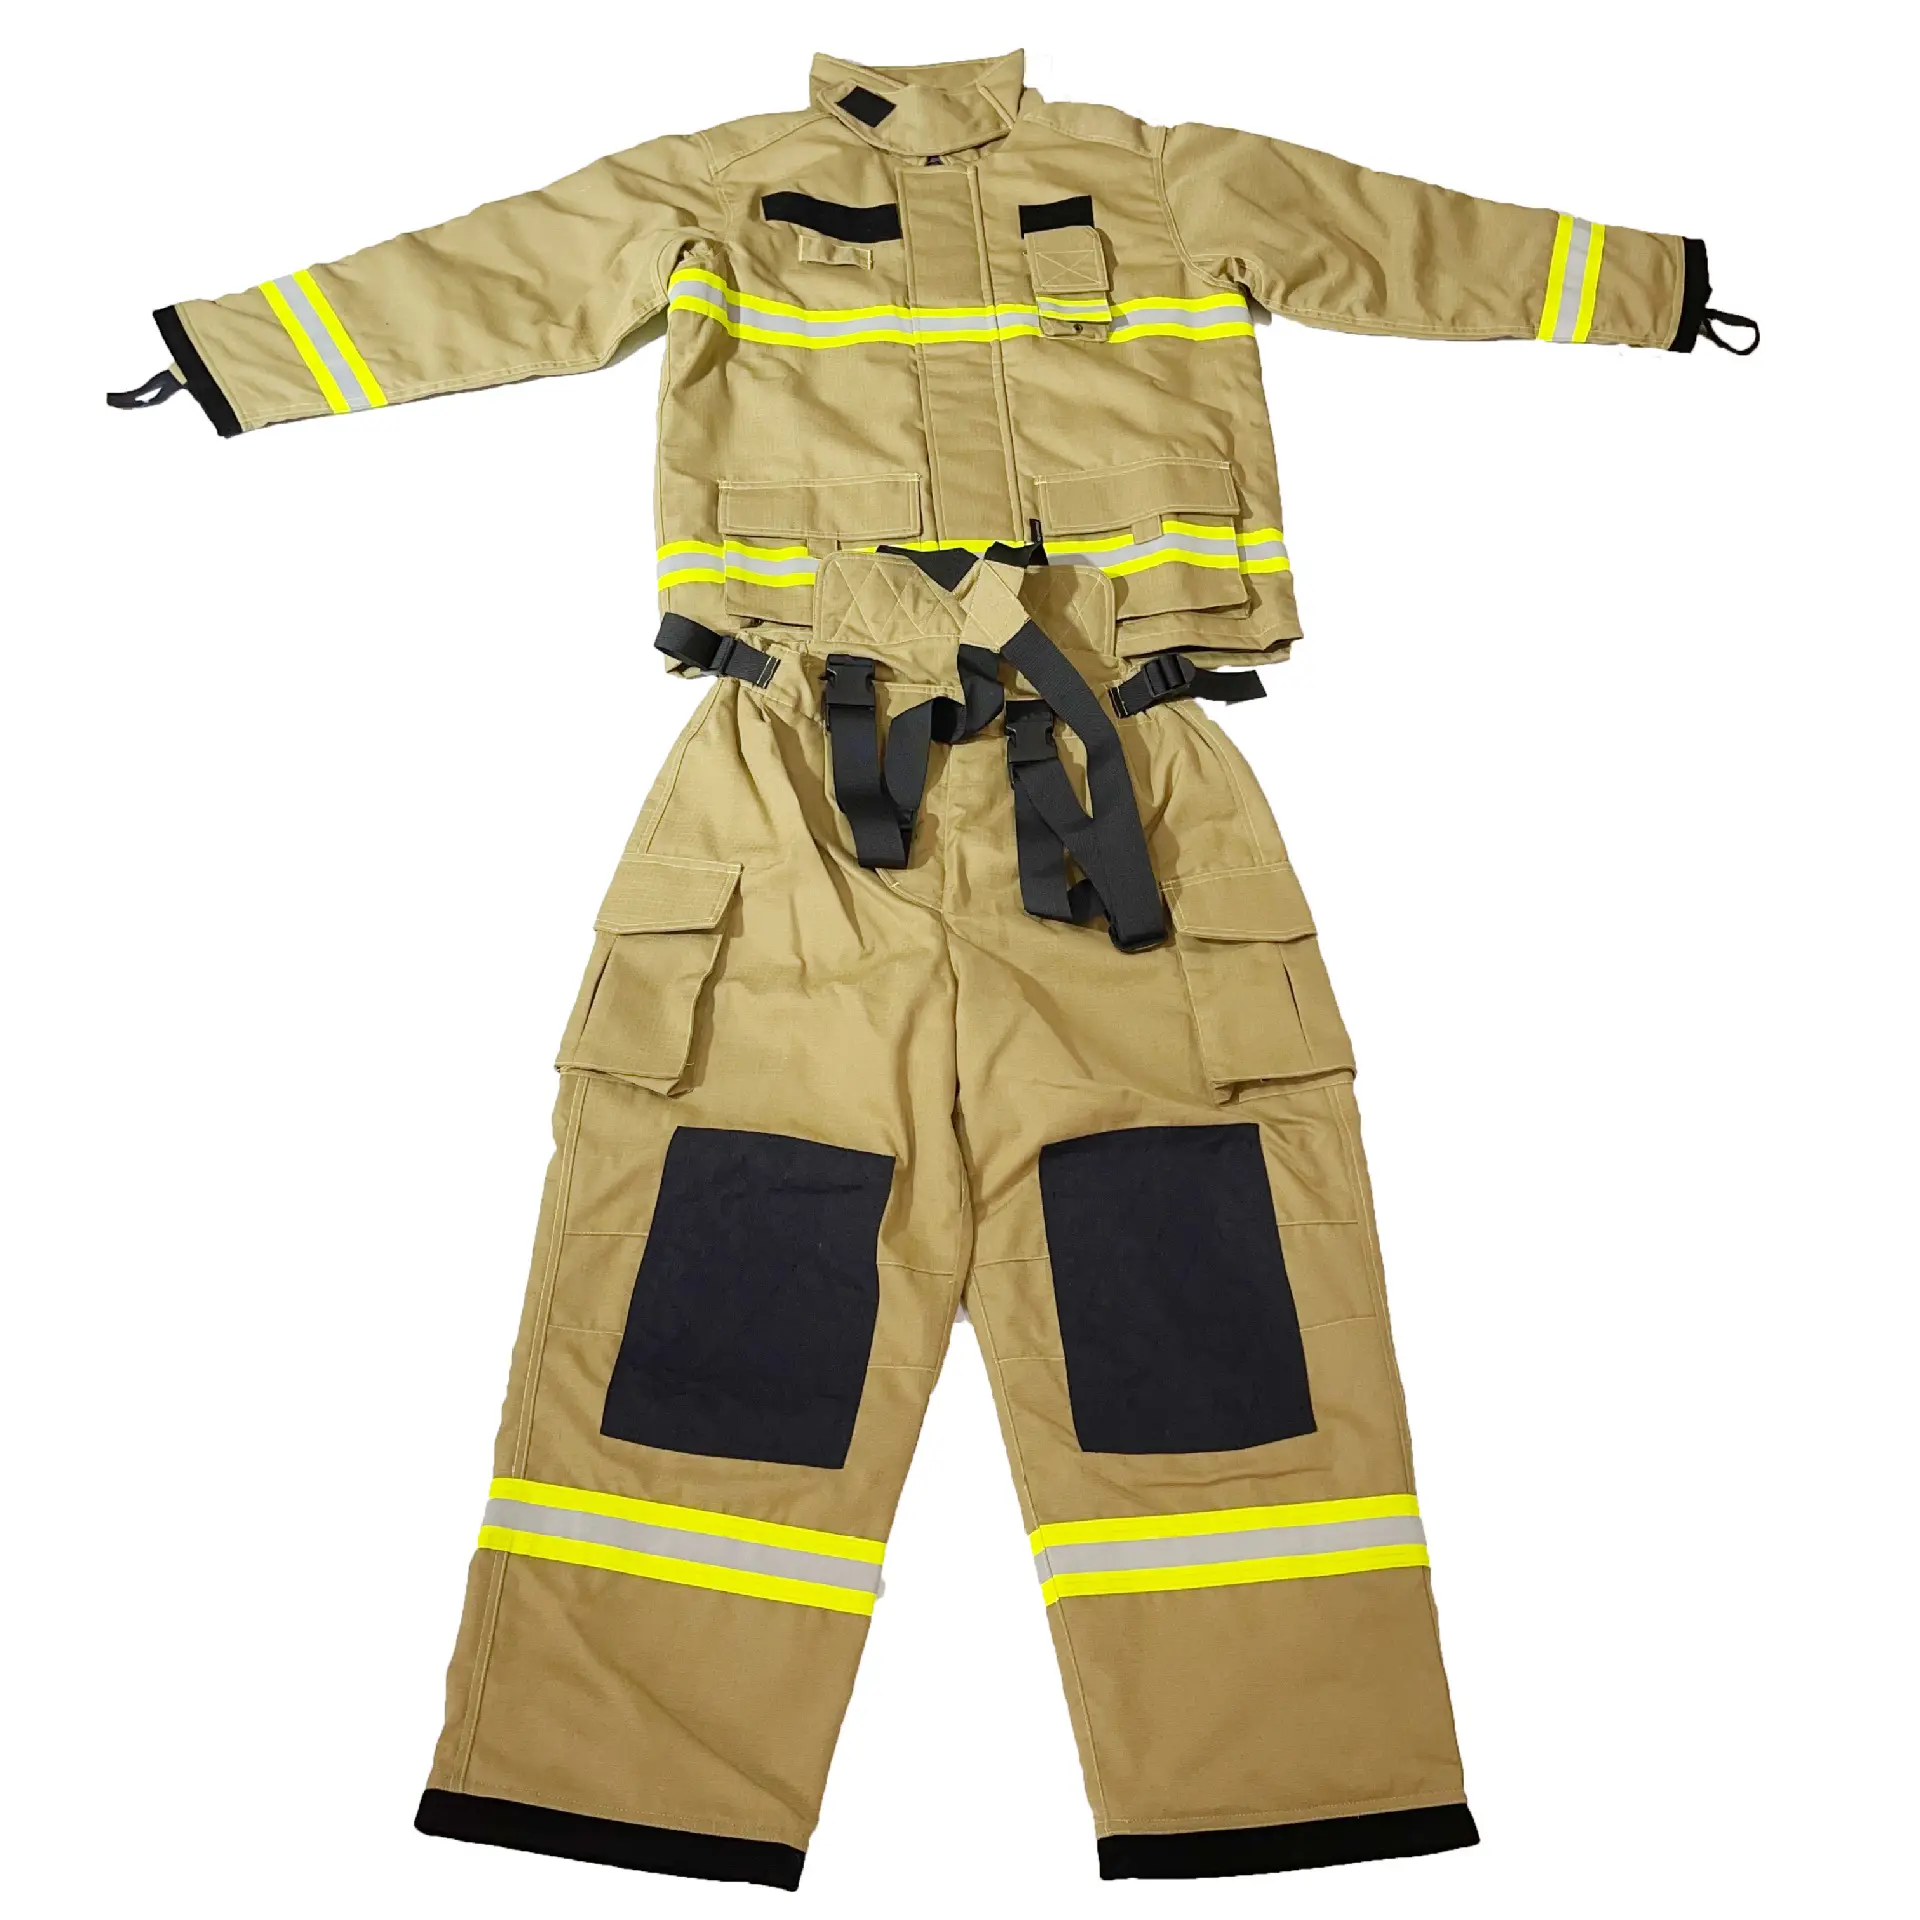 Nomex Turnout gear Fire Fighting Fireman Uniform Firefighter suit with EN469 and NFPA1971 Standards